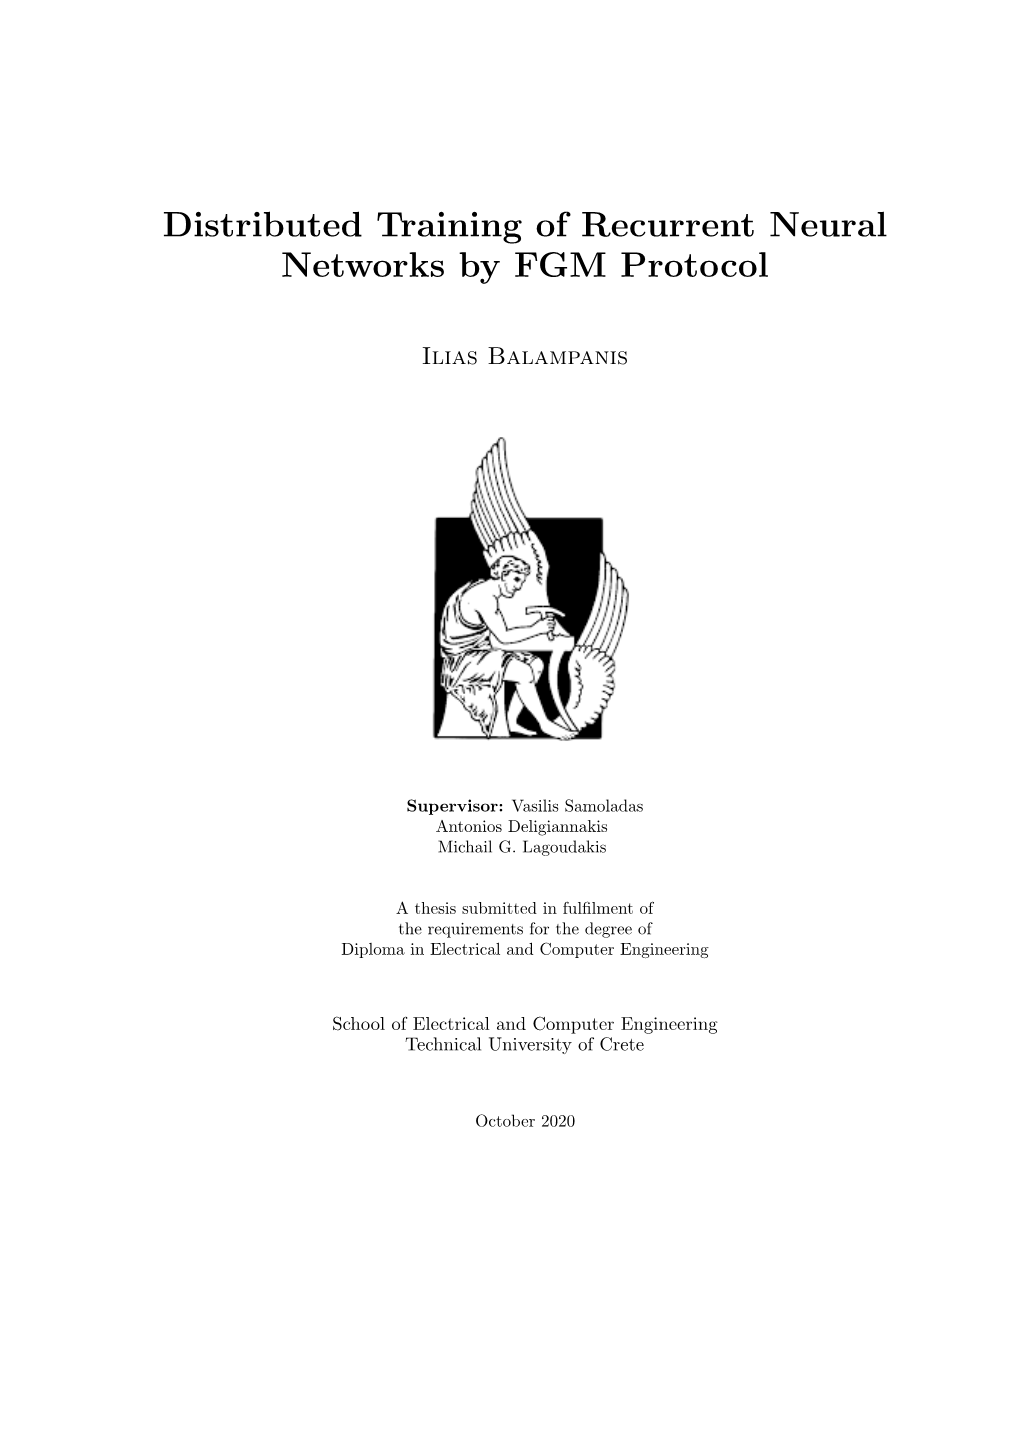 Distributed Training of Recurrent Neural Networks by FGM Protocol